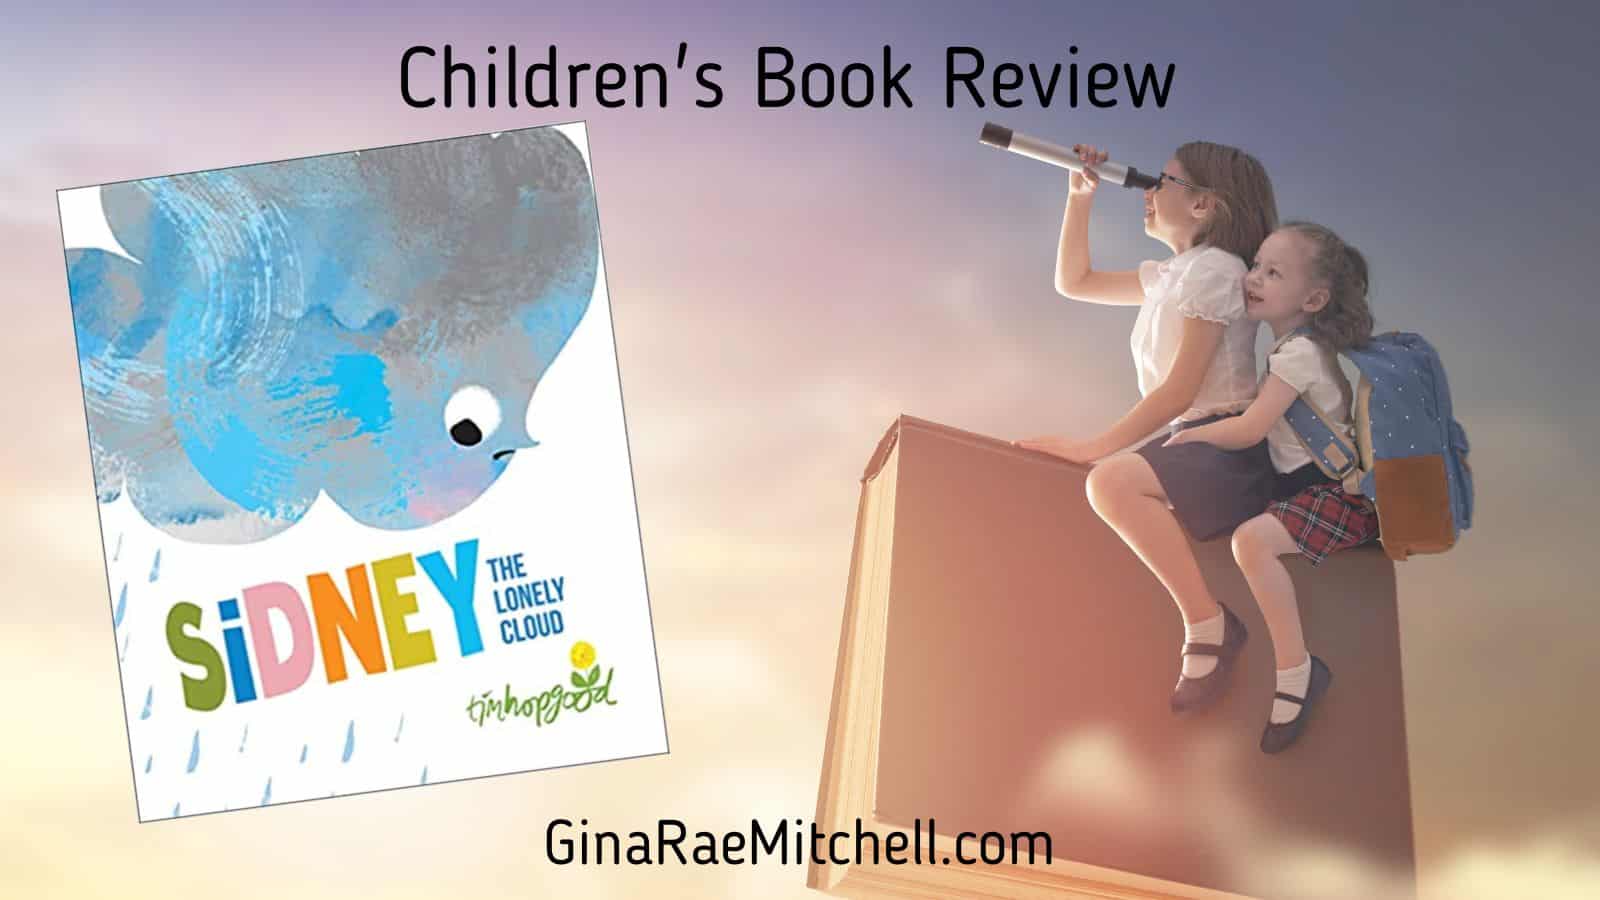 Sidney the Lonely Cloud by Tim Hopgood | Children’s Book Review 